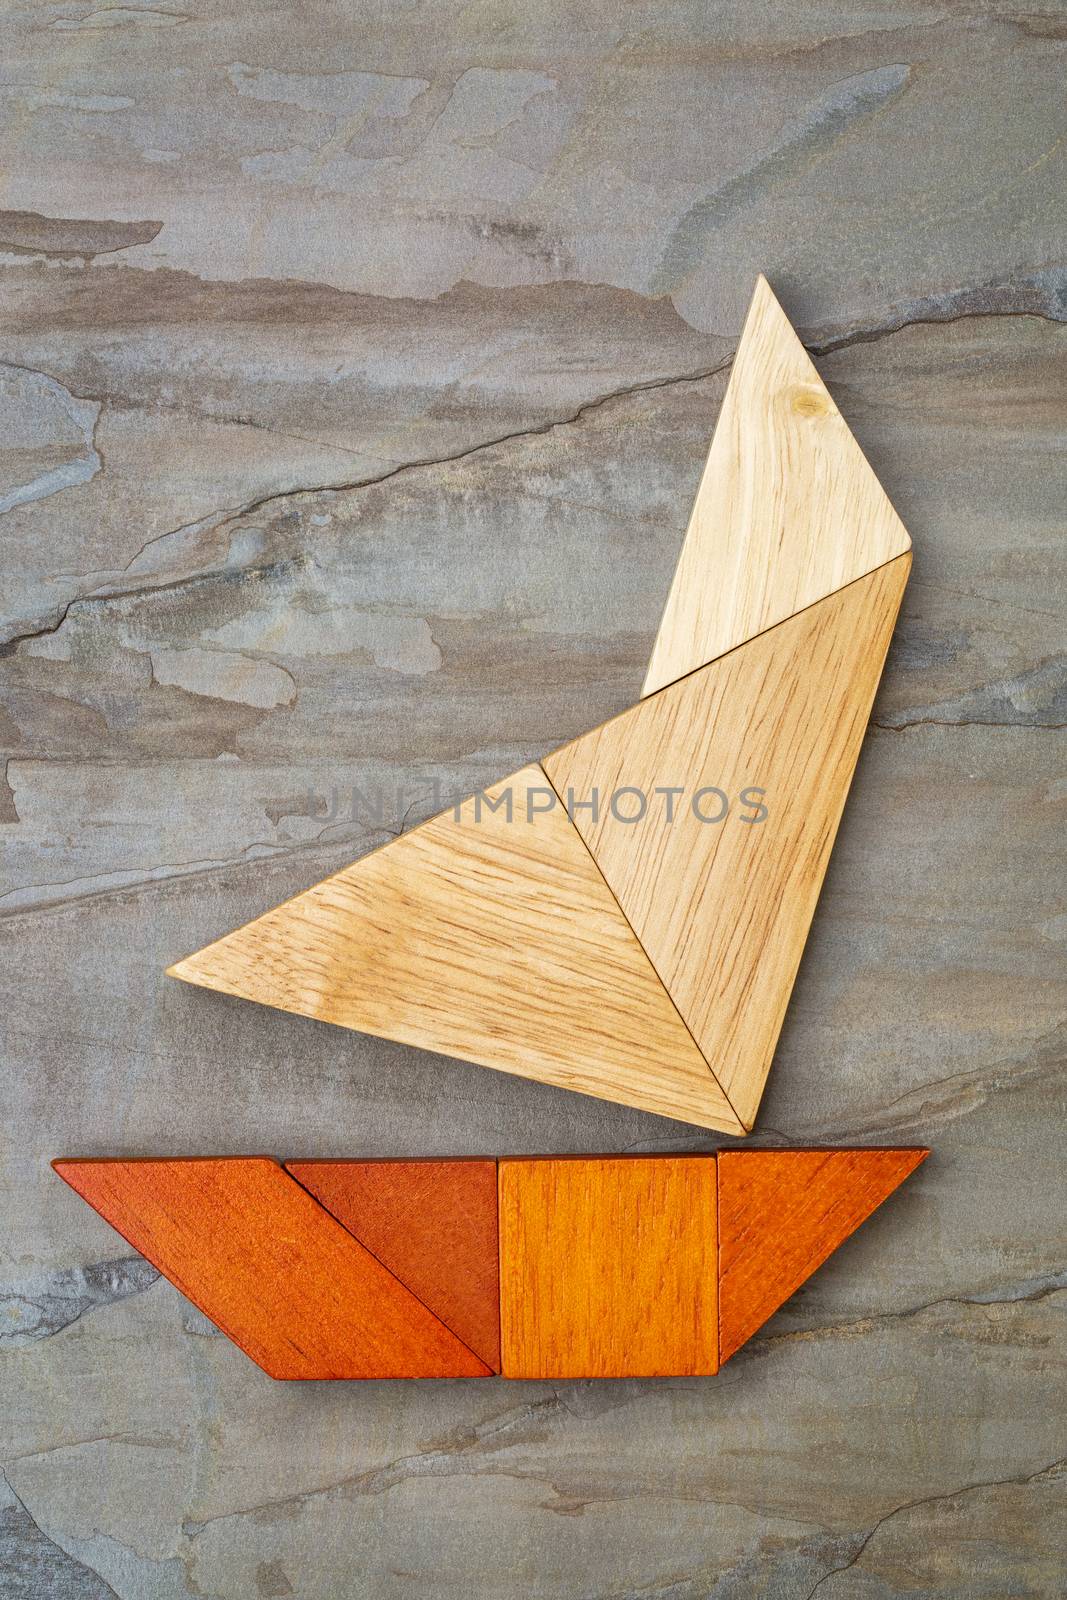 abstract yacht from tangram puzzle by PixelsAway